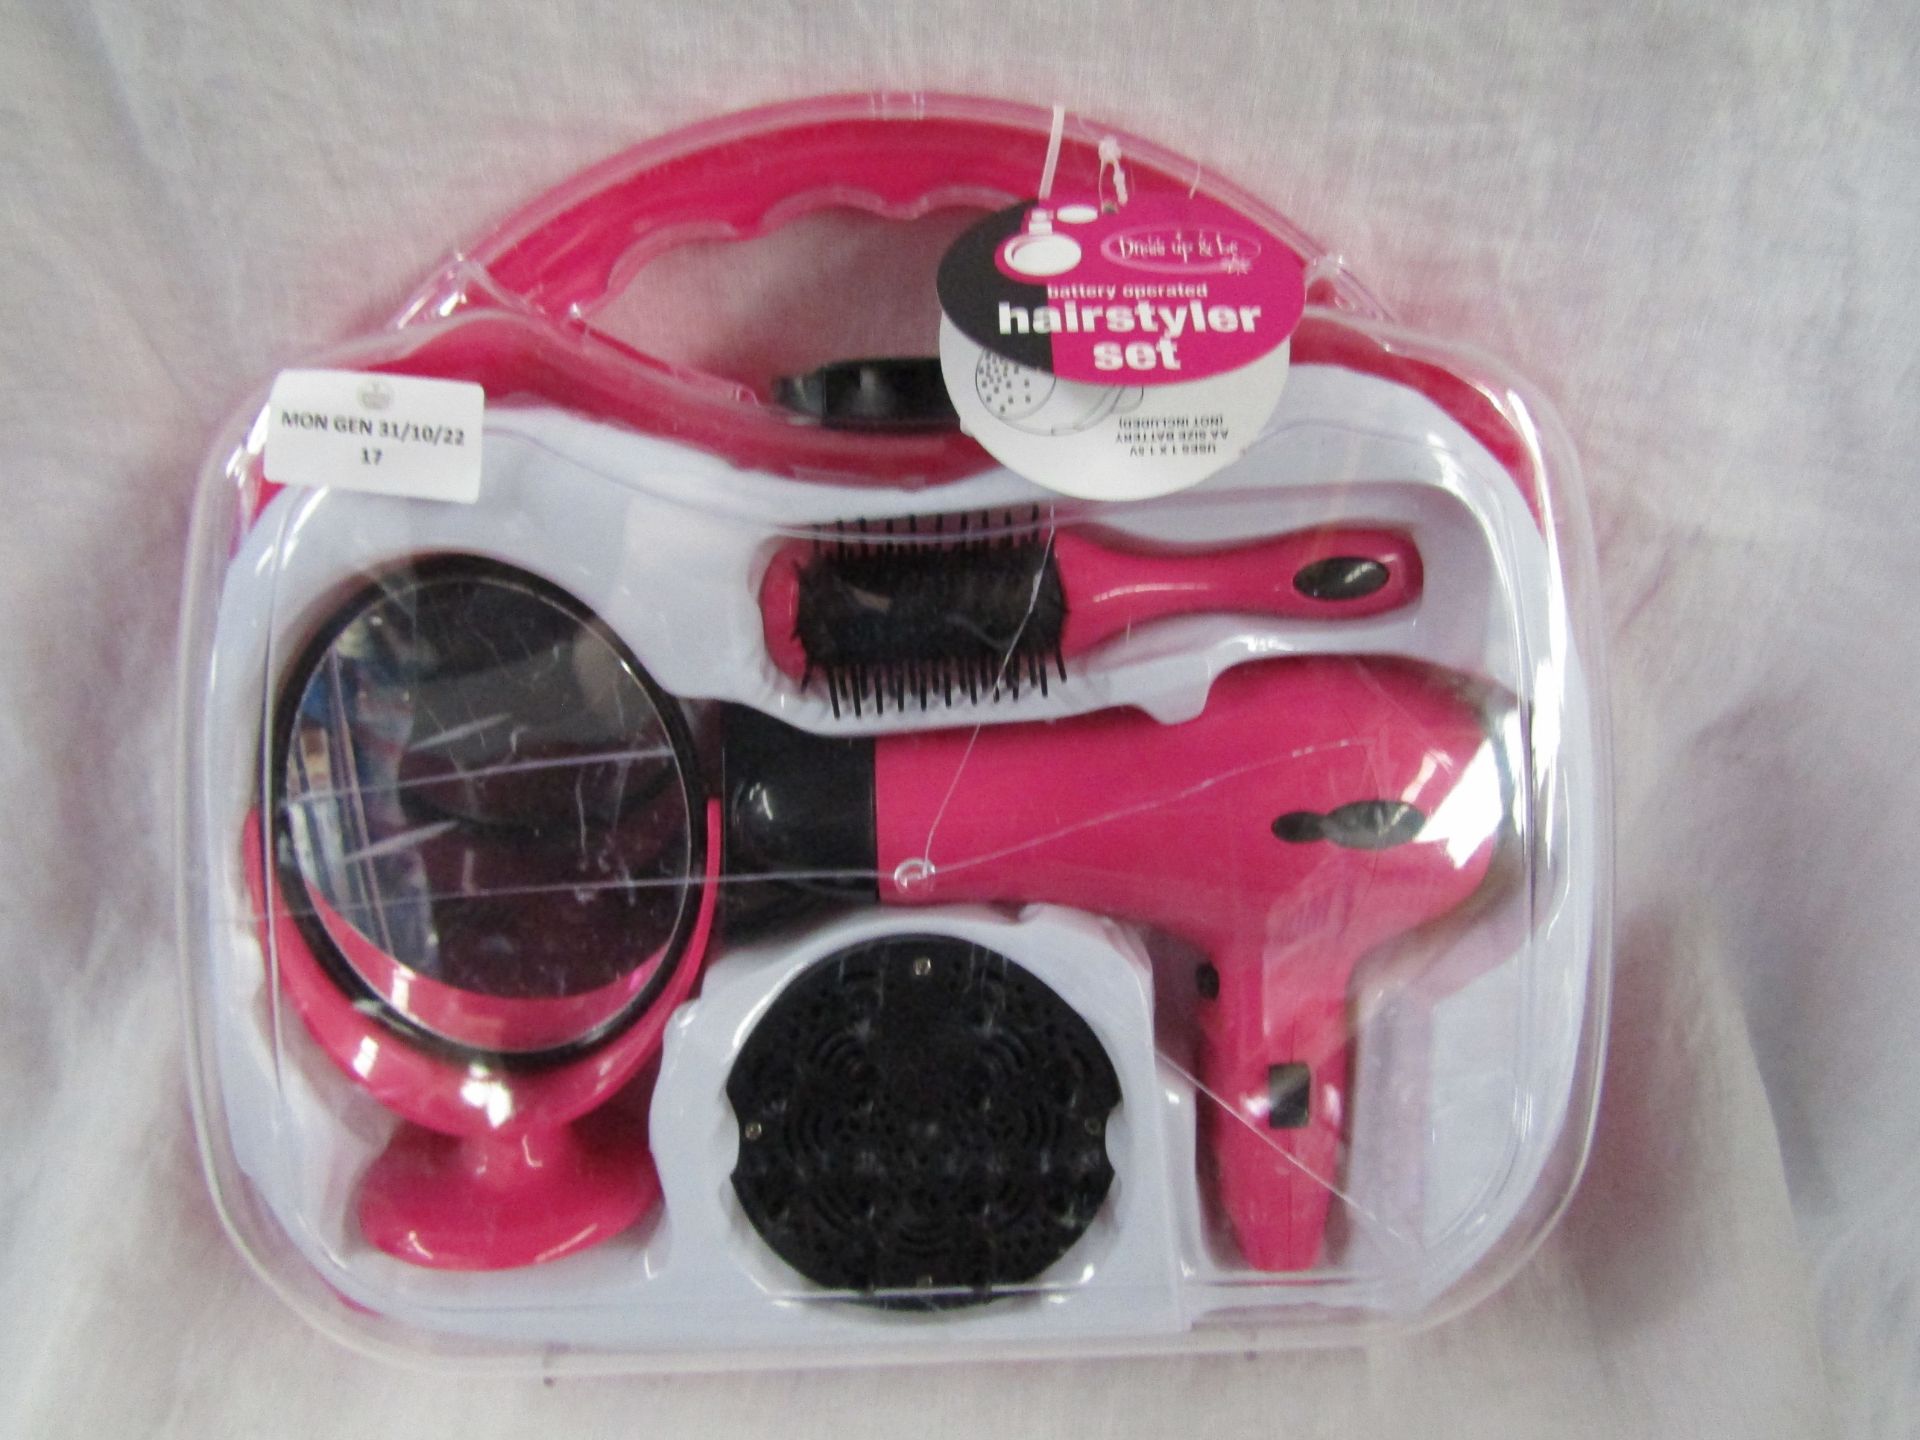 Dress-Up & Be - Battery Operated Hairstyler Set - Case Damaged, No Packaging.